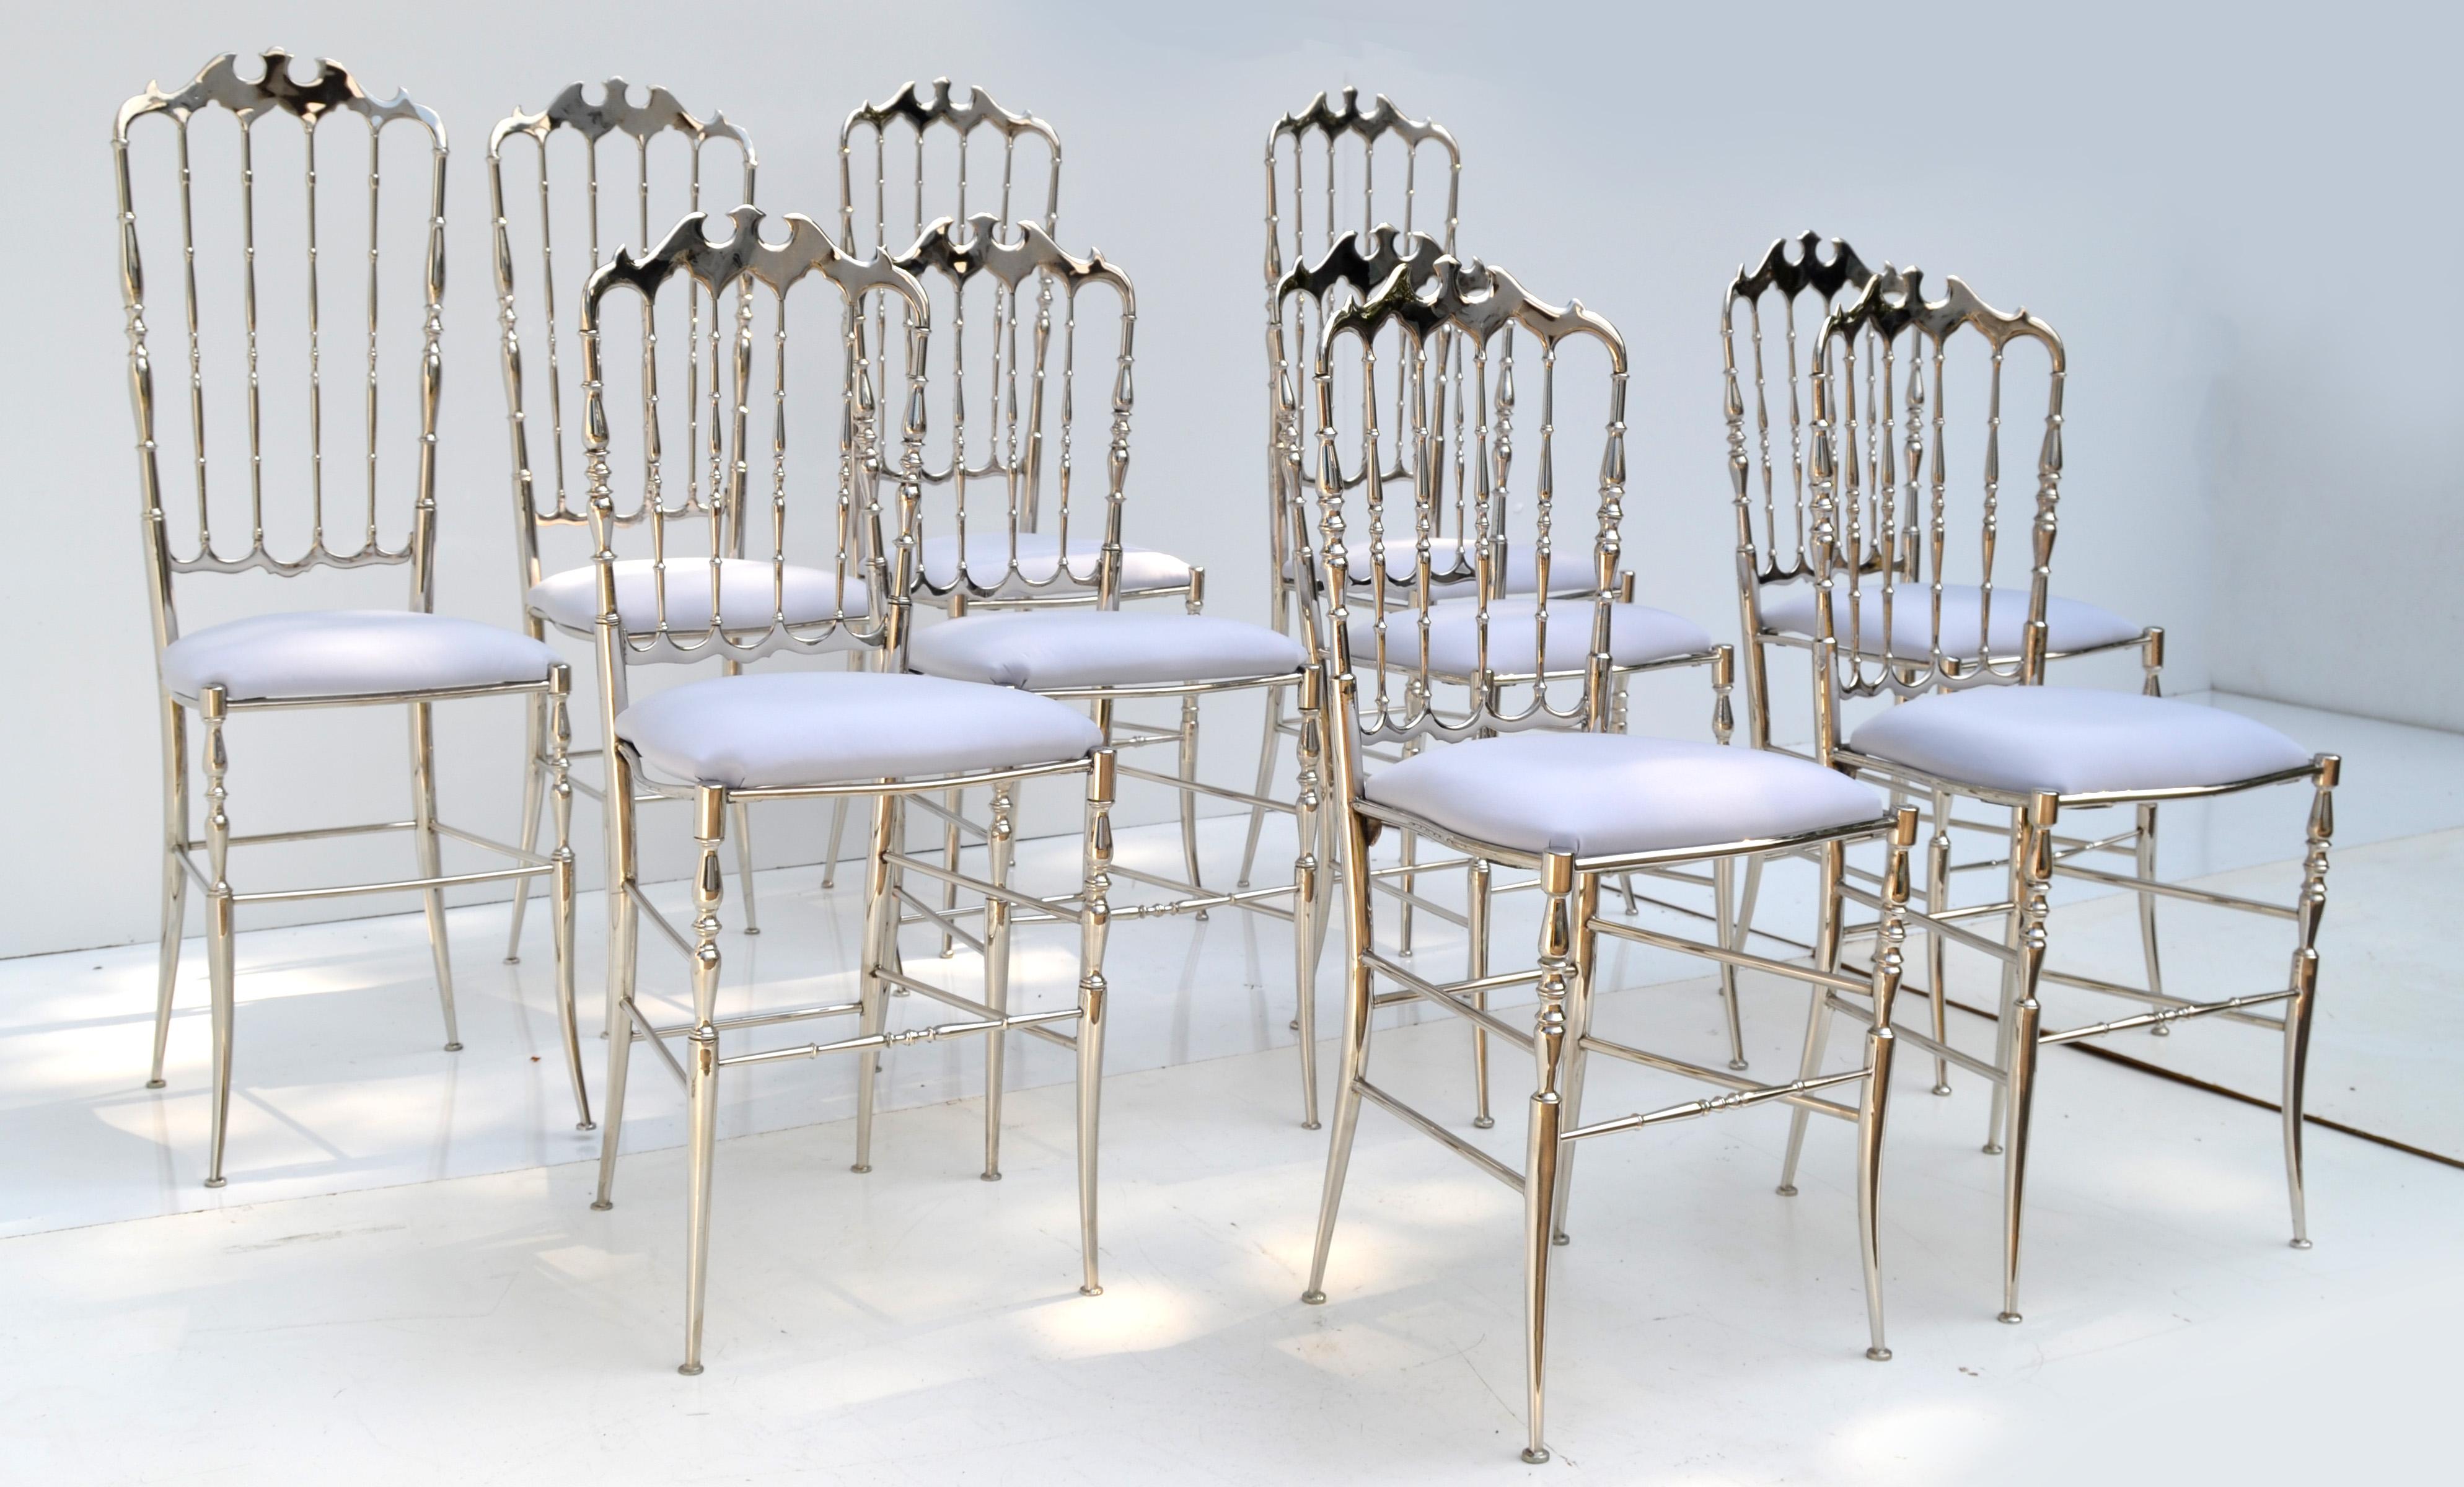 Exceptional set of ten Italian nickel-plated over Brass Chiavari chairs.
Consisting out of 6 Dining Chairs and 4 high back Side Chairs.
New light violet silk upholstery.
Similar chairs are at the 